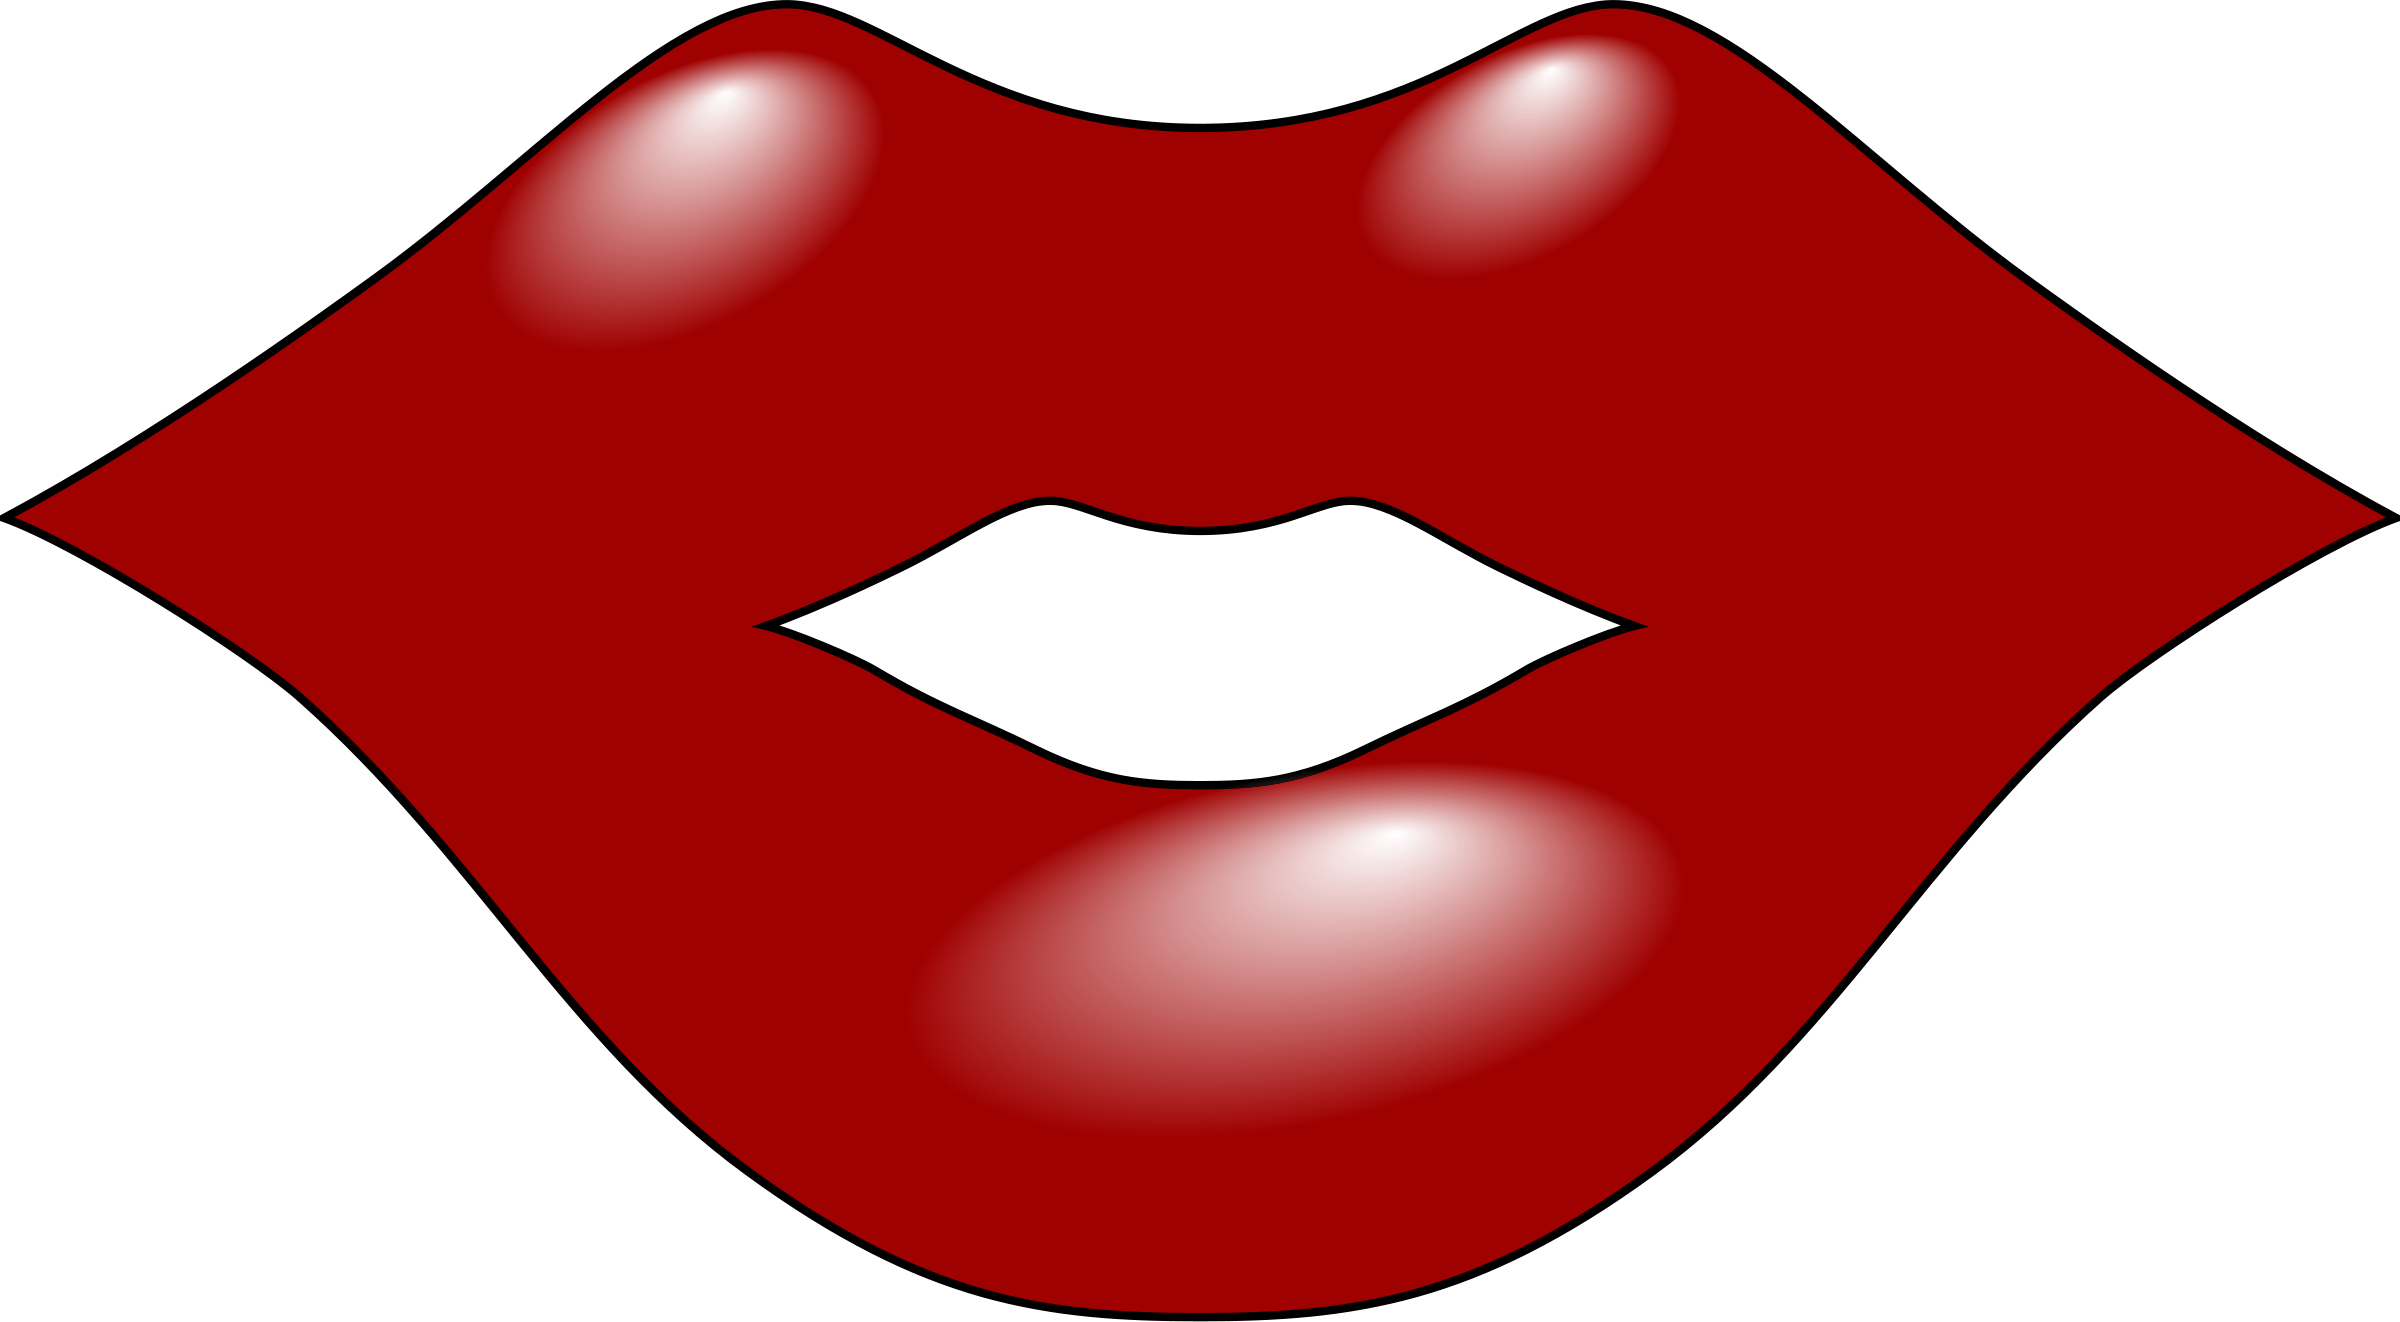 Red Lips and Tongue Logo - Free Red Lips Clipart, Download Free Clip Art, Free Clip Art on ...